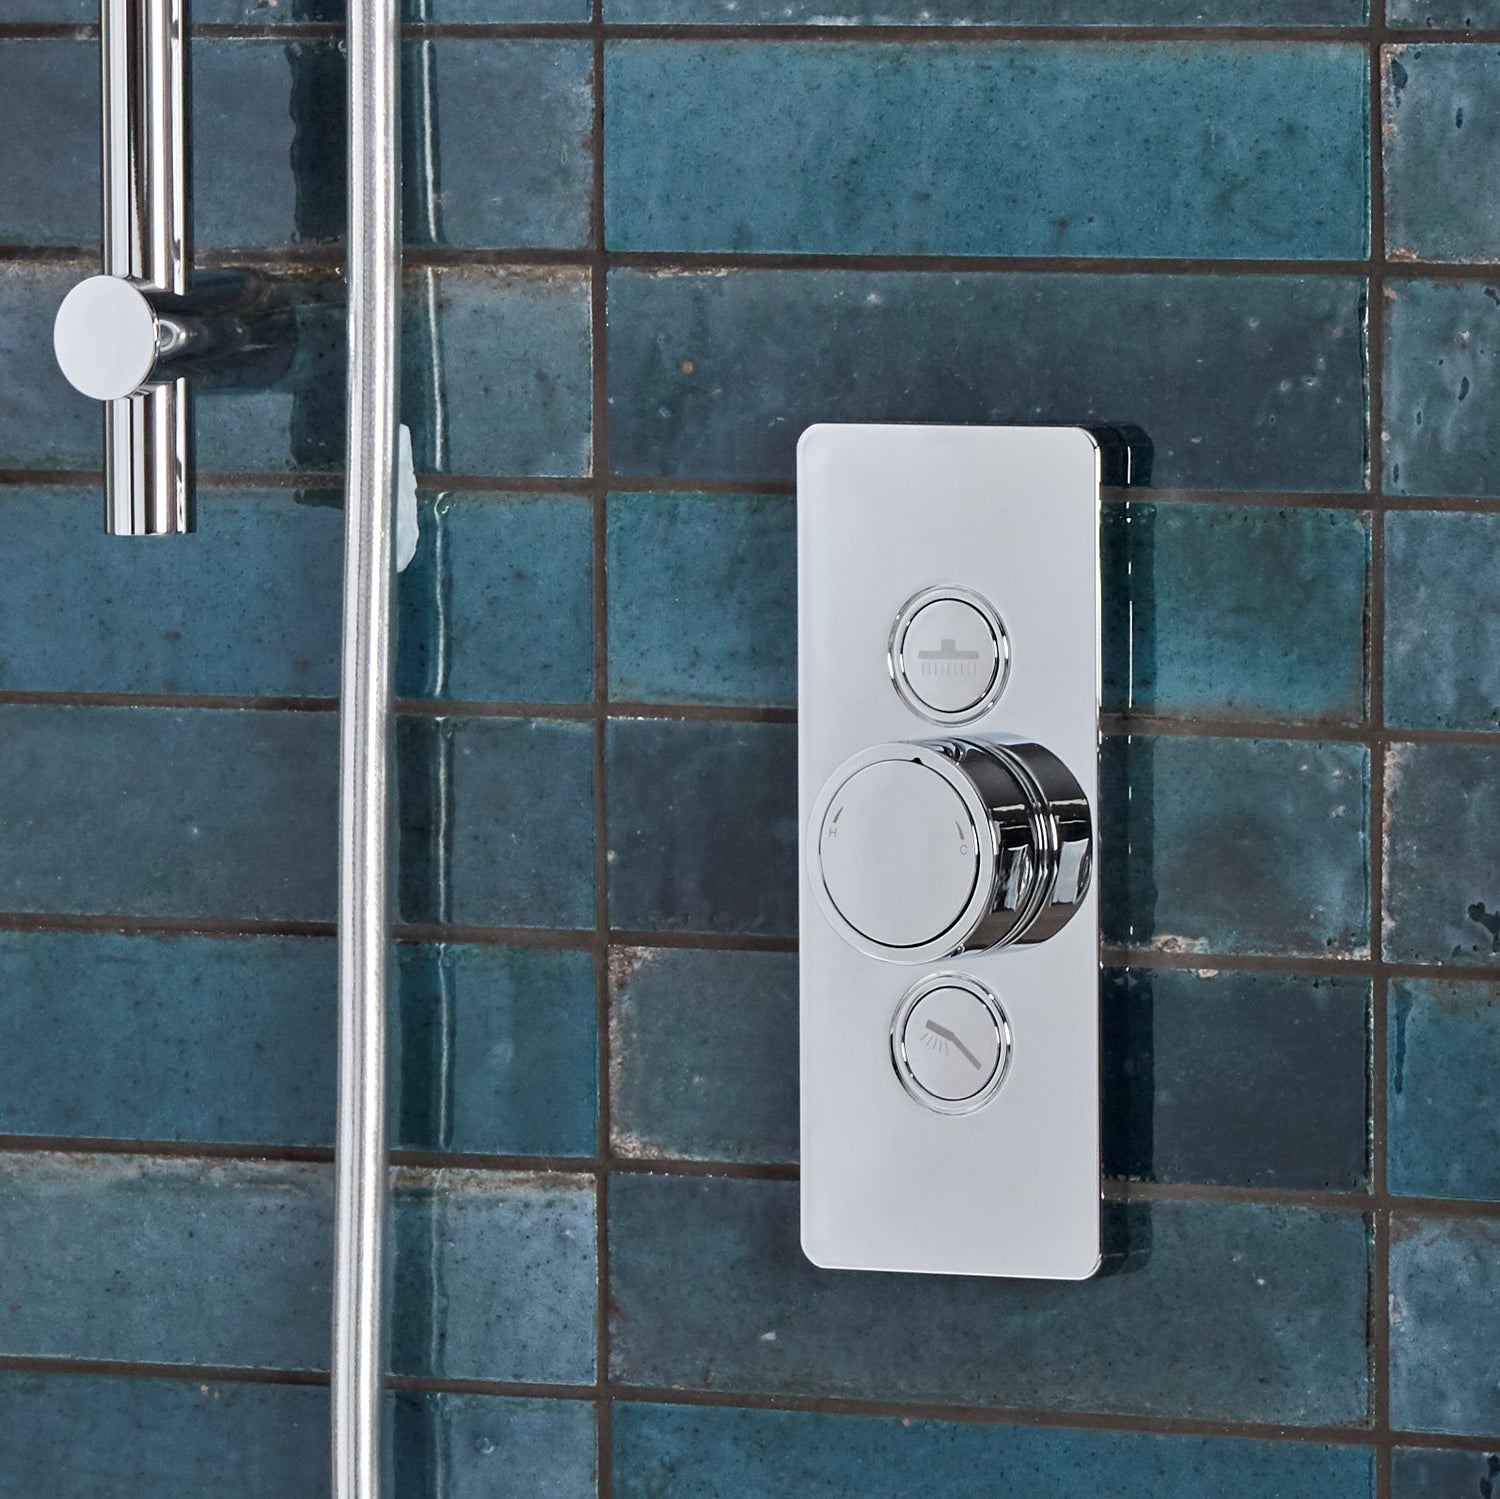 Tavistock Axiom Dual Function Push Button Shower System With Head And Riser Kit close up of controls against blue tiling SAX2516